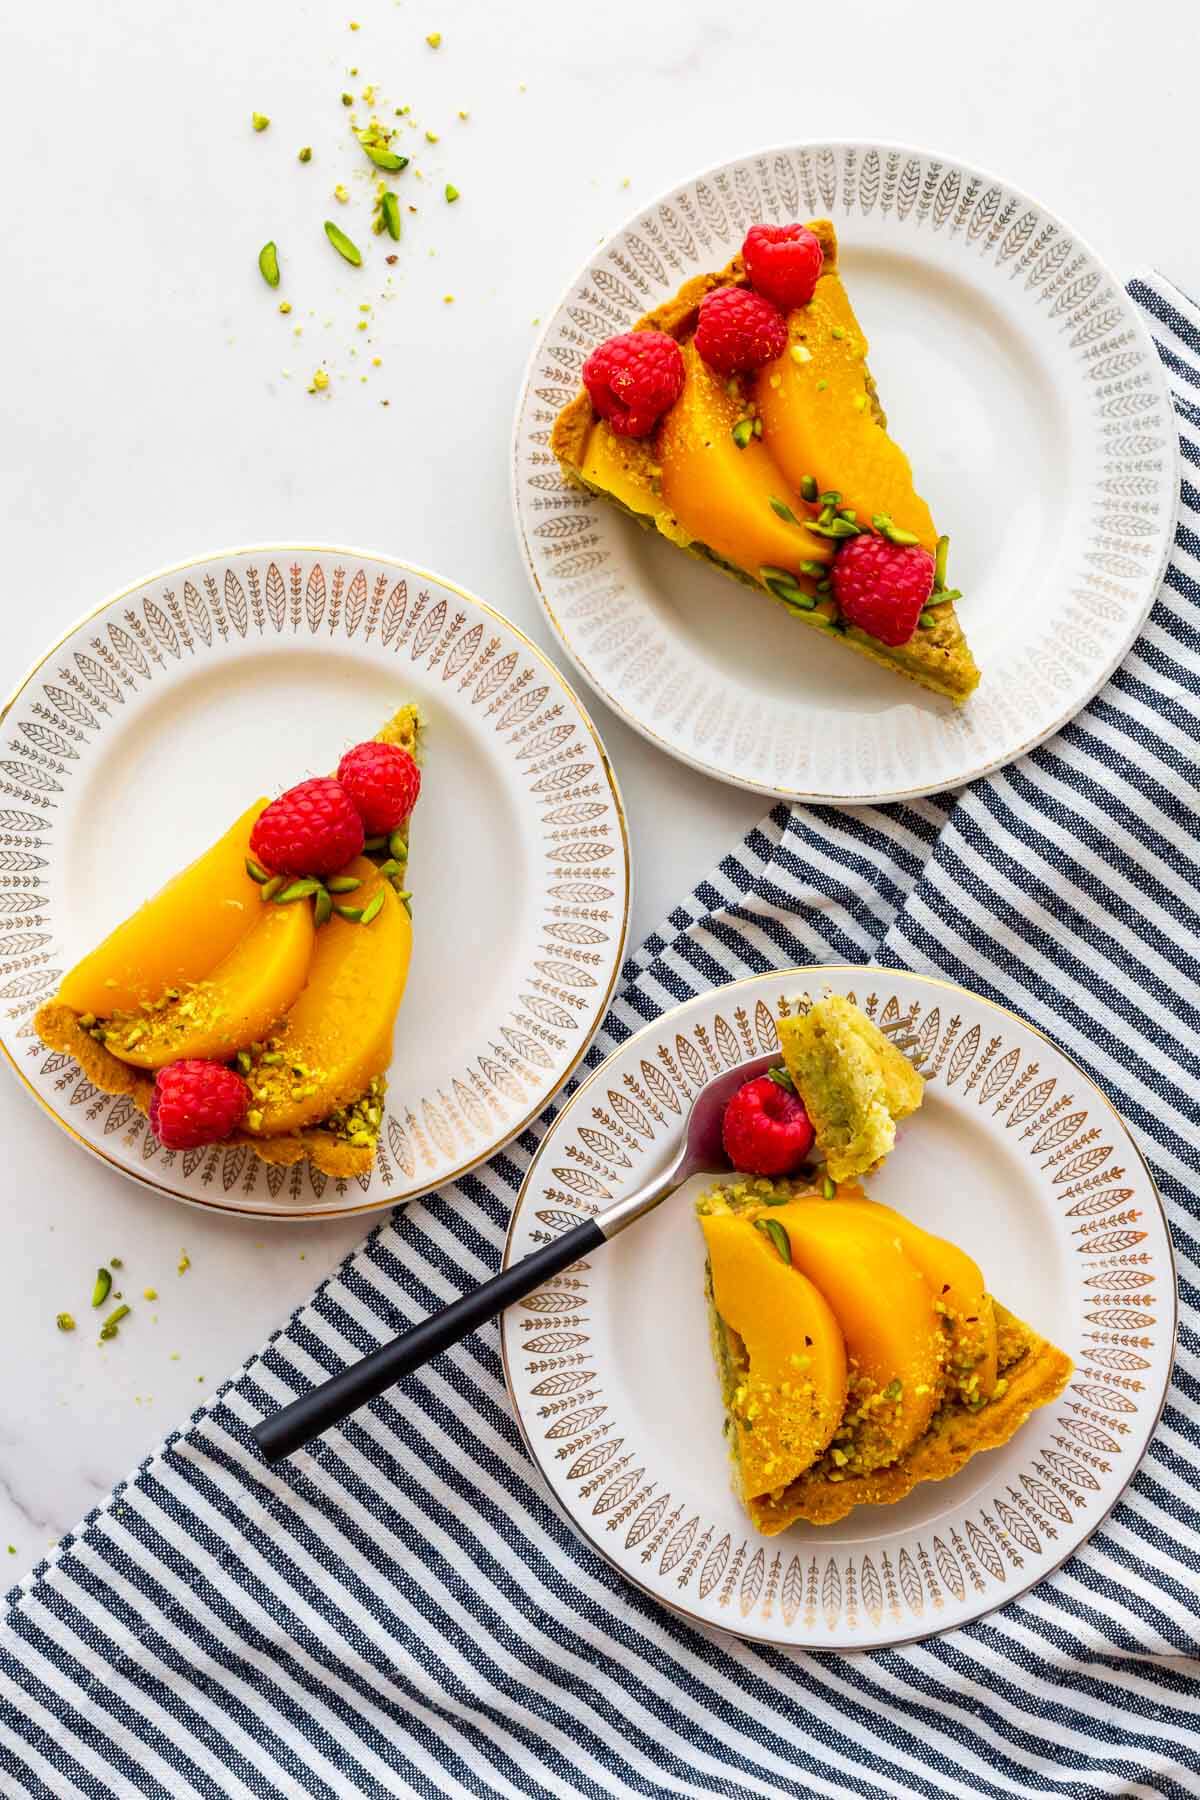 Three slices of pistachio tart with raspberries and peaches on plates.